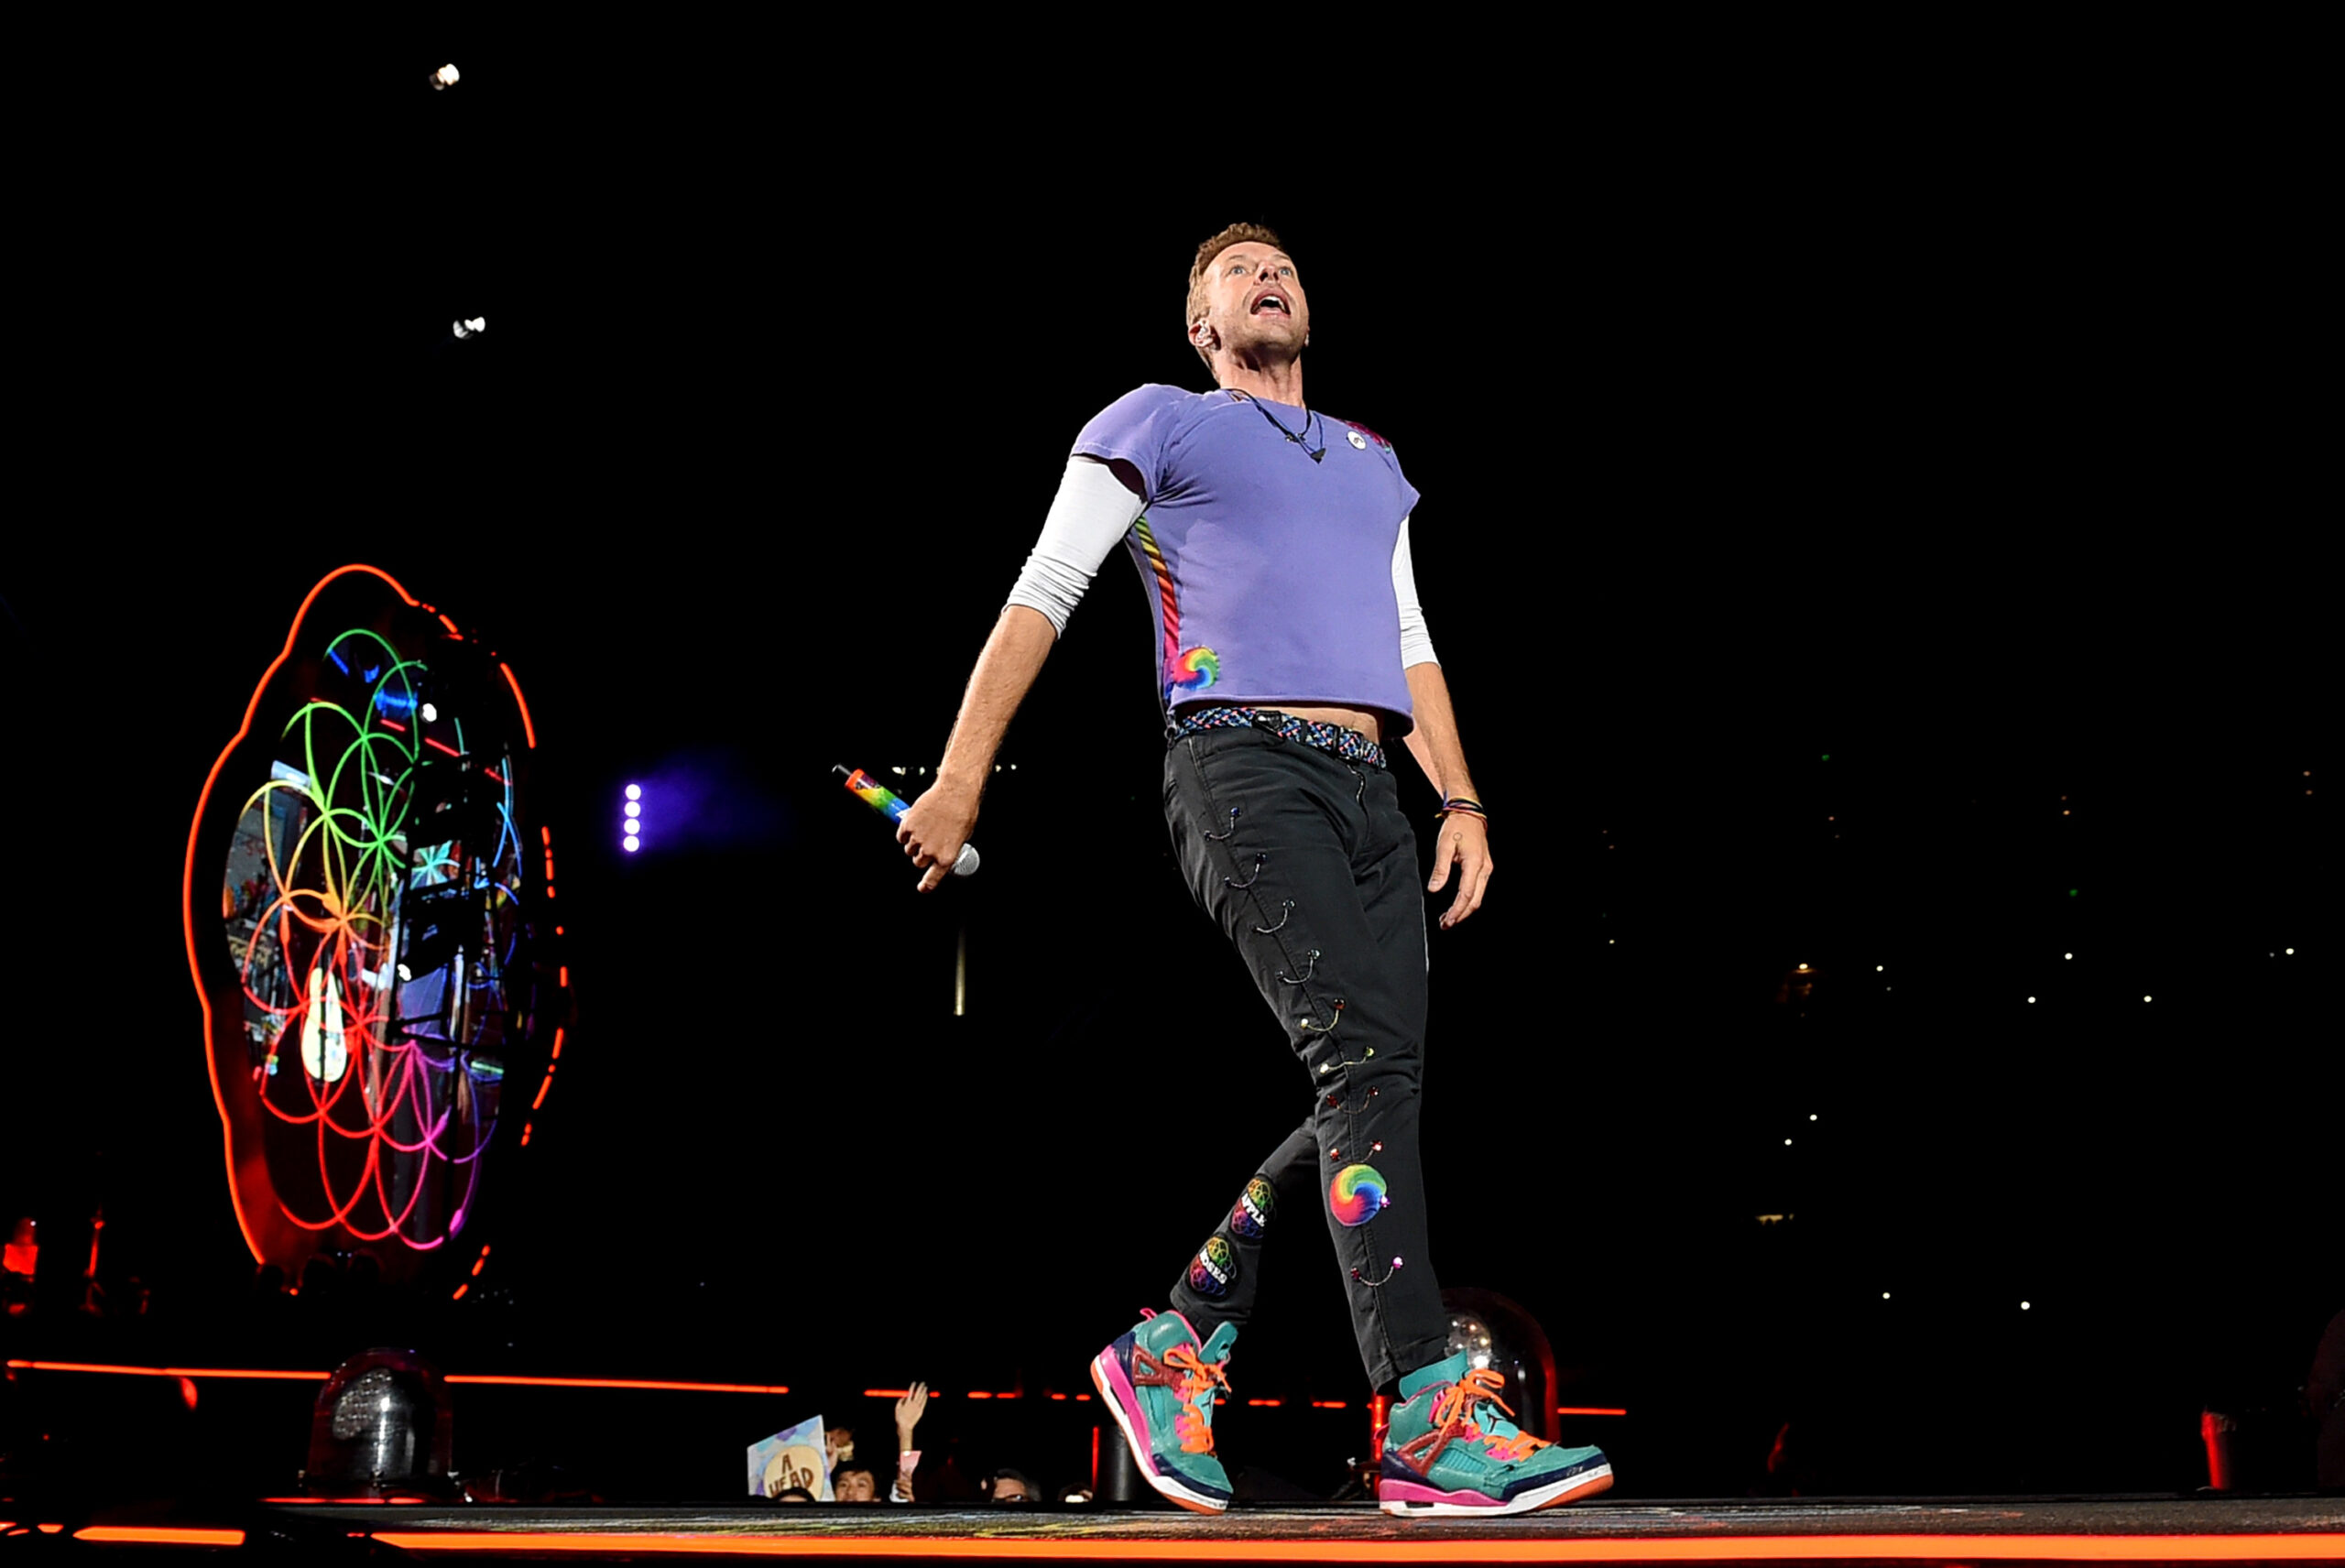 PASADENA, CA - OCTOBER 06: Singer Chris Martin of Coldplay performs at the Rose Bowl on October 6, 2017 in Pasadena, California. (Photo by Kevin Winter/Getty Images)